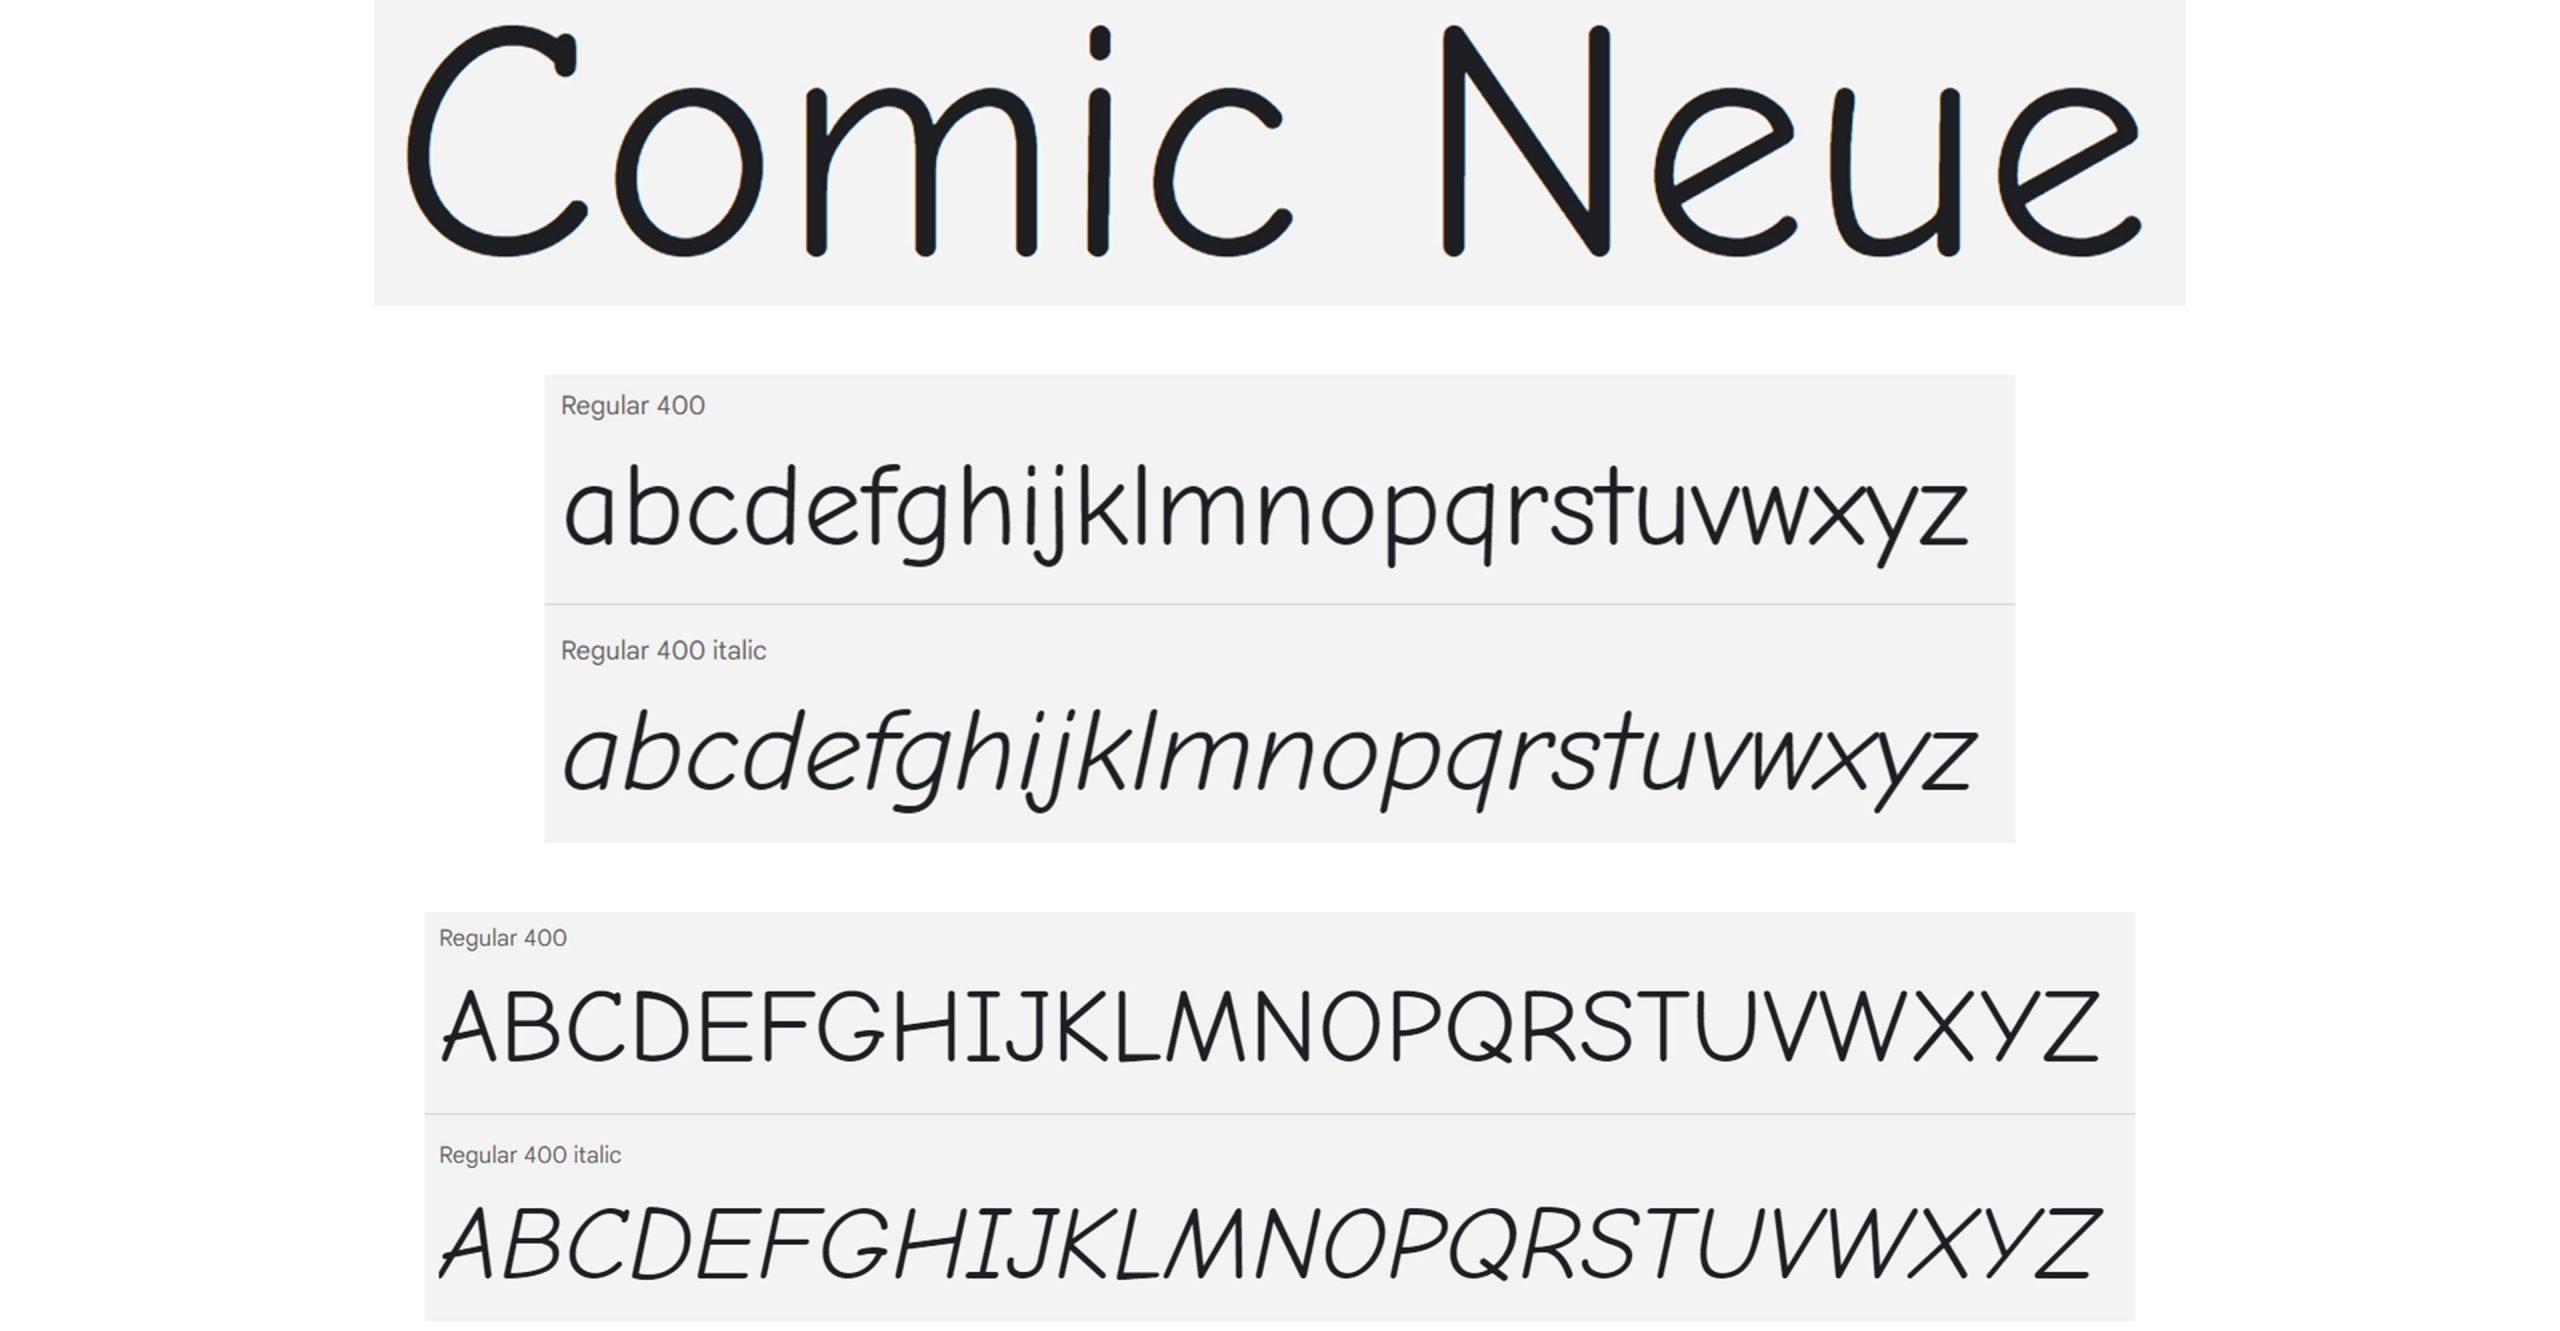 Comic Neue Google font A to Z